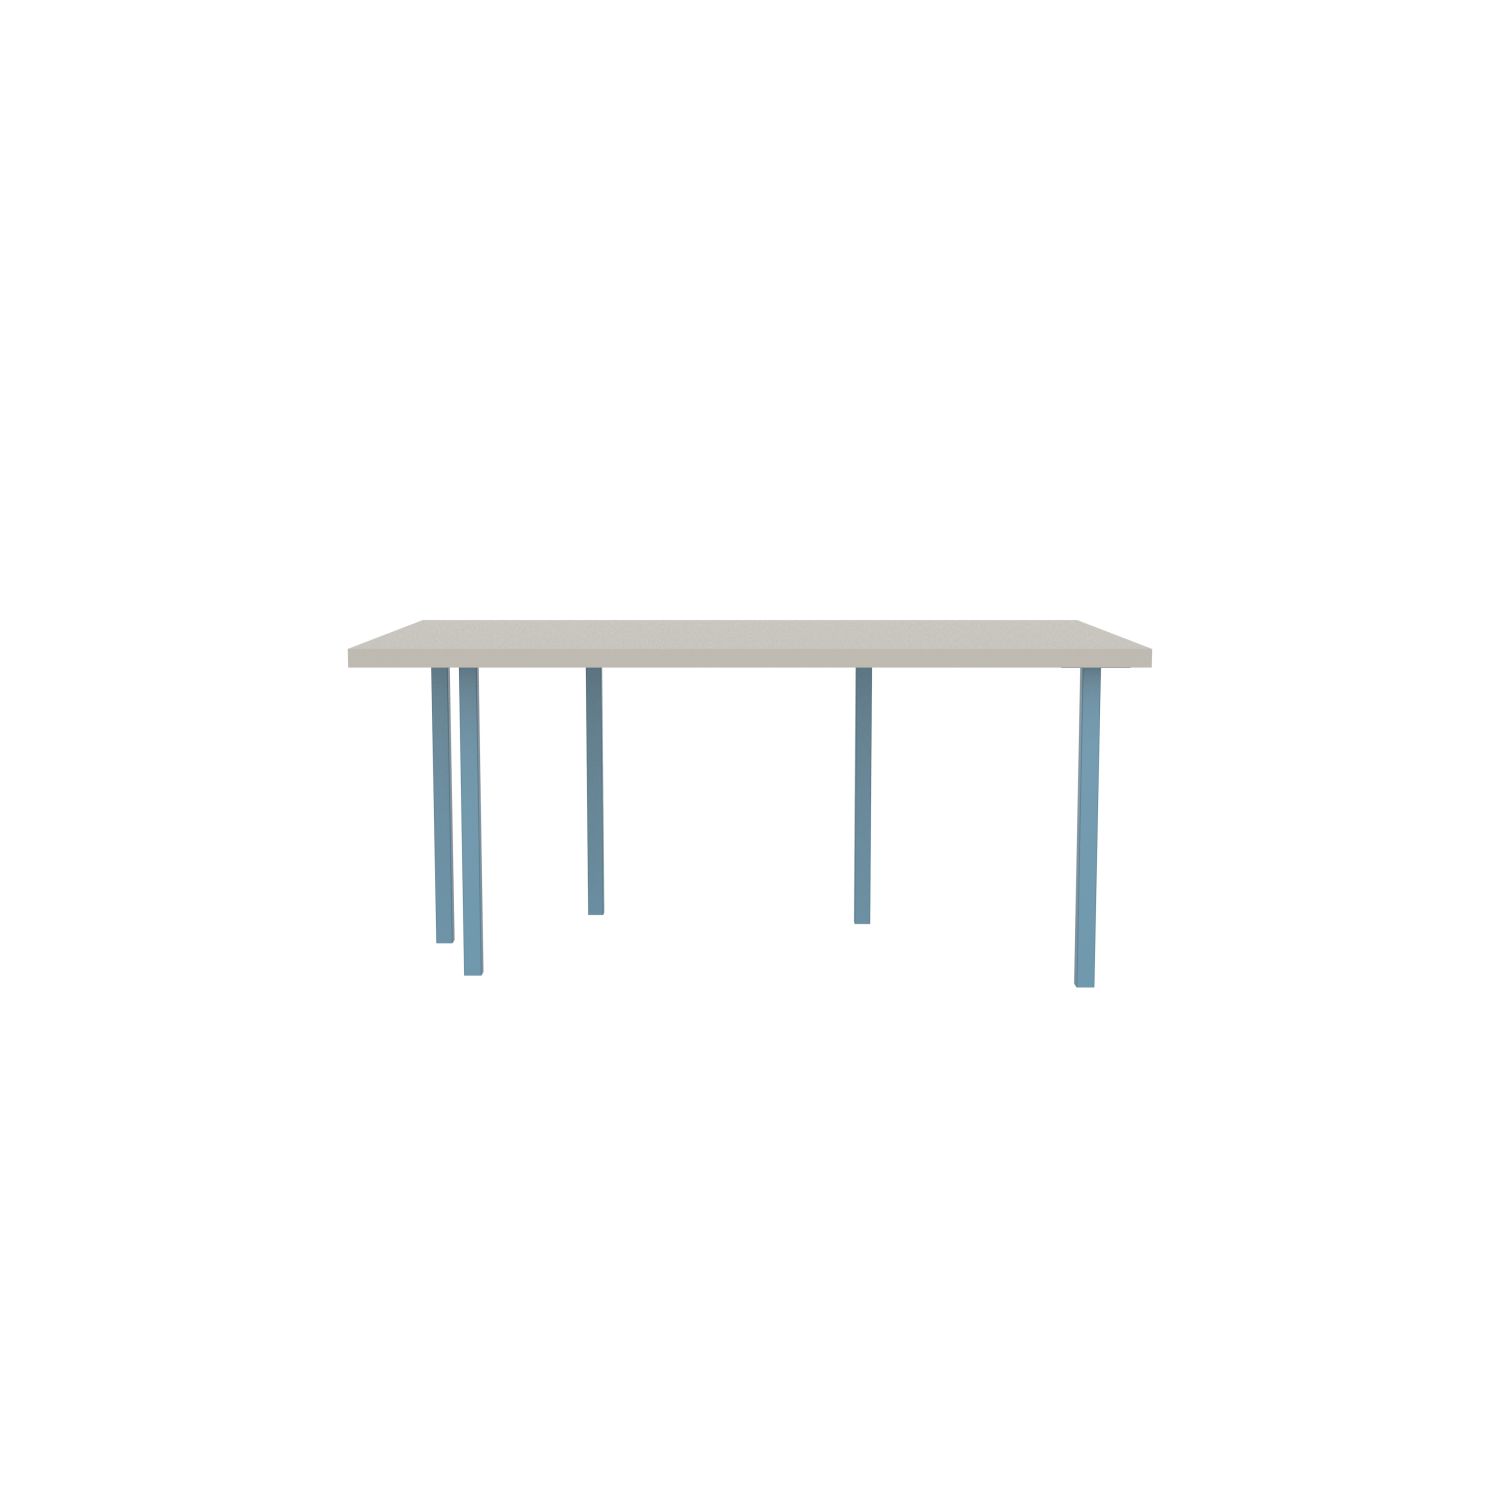 lensvelt bbrand table five fixed heigt 103x172 hpl white 50 mm price level 1 blue ral5024